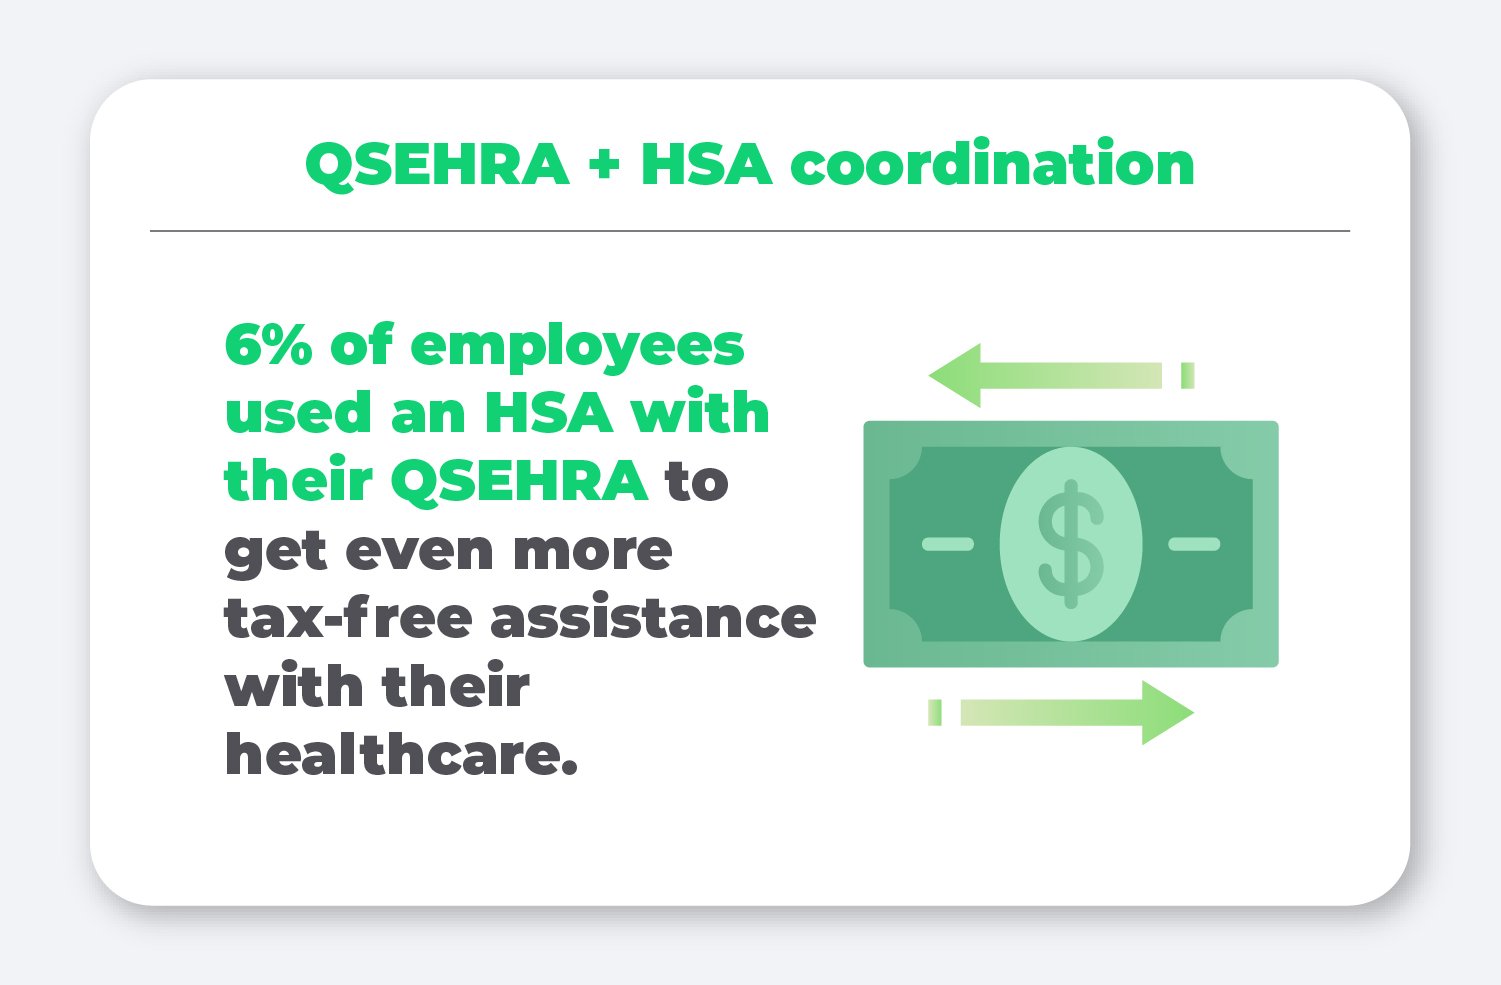 QSEHRA + HSA coordination. 6% of employees used an HSA with their QSEHRA to get even more tax-free assistance with their healthcare.